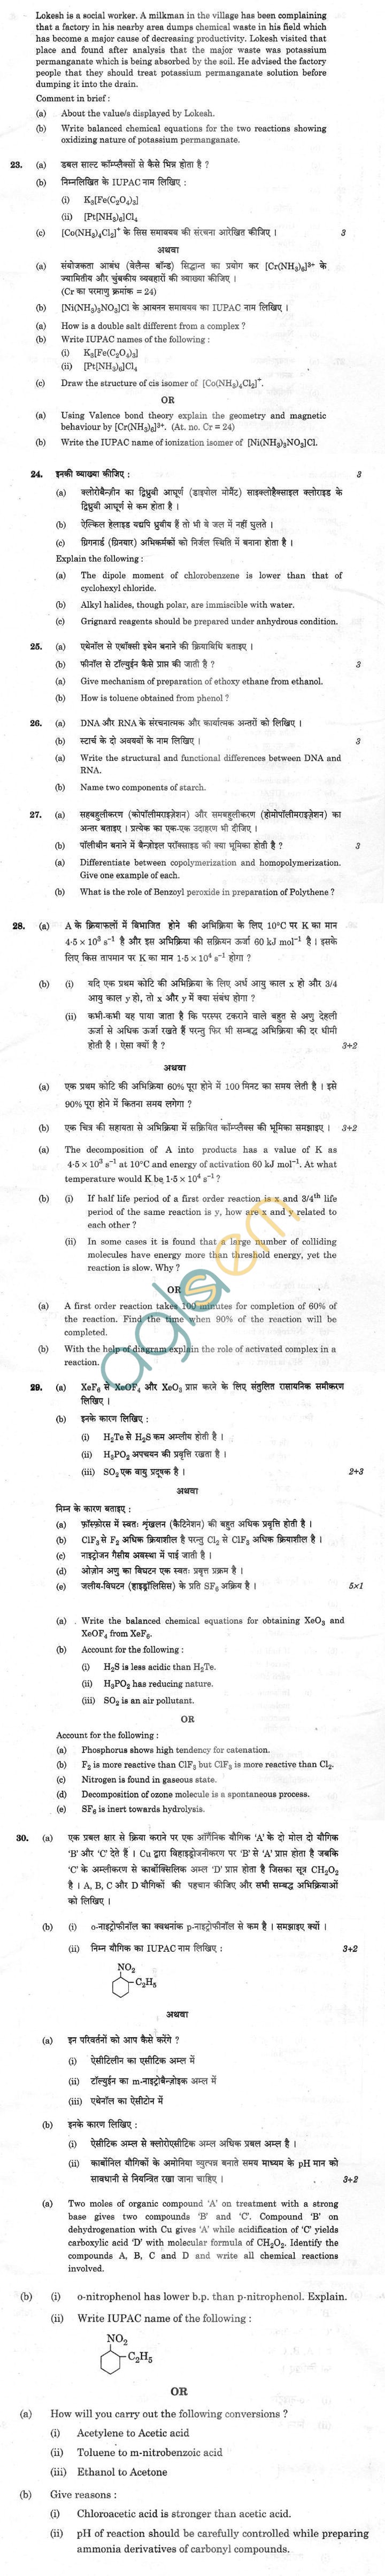 CBSE Compartment Exam 2013 Class XII Question Paper - Chemistry